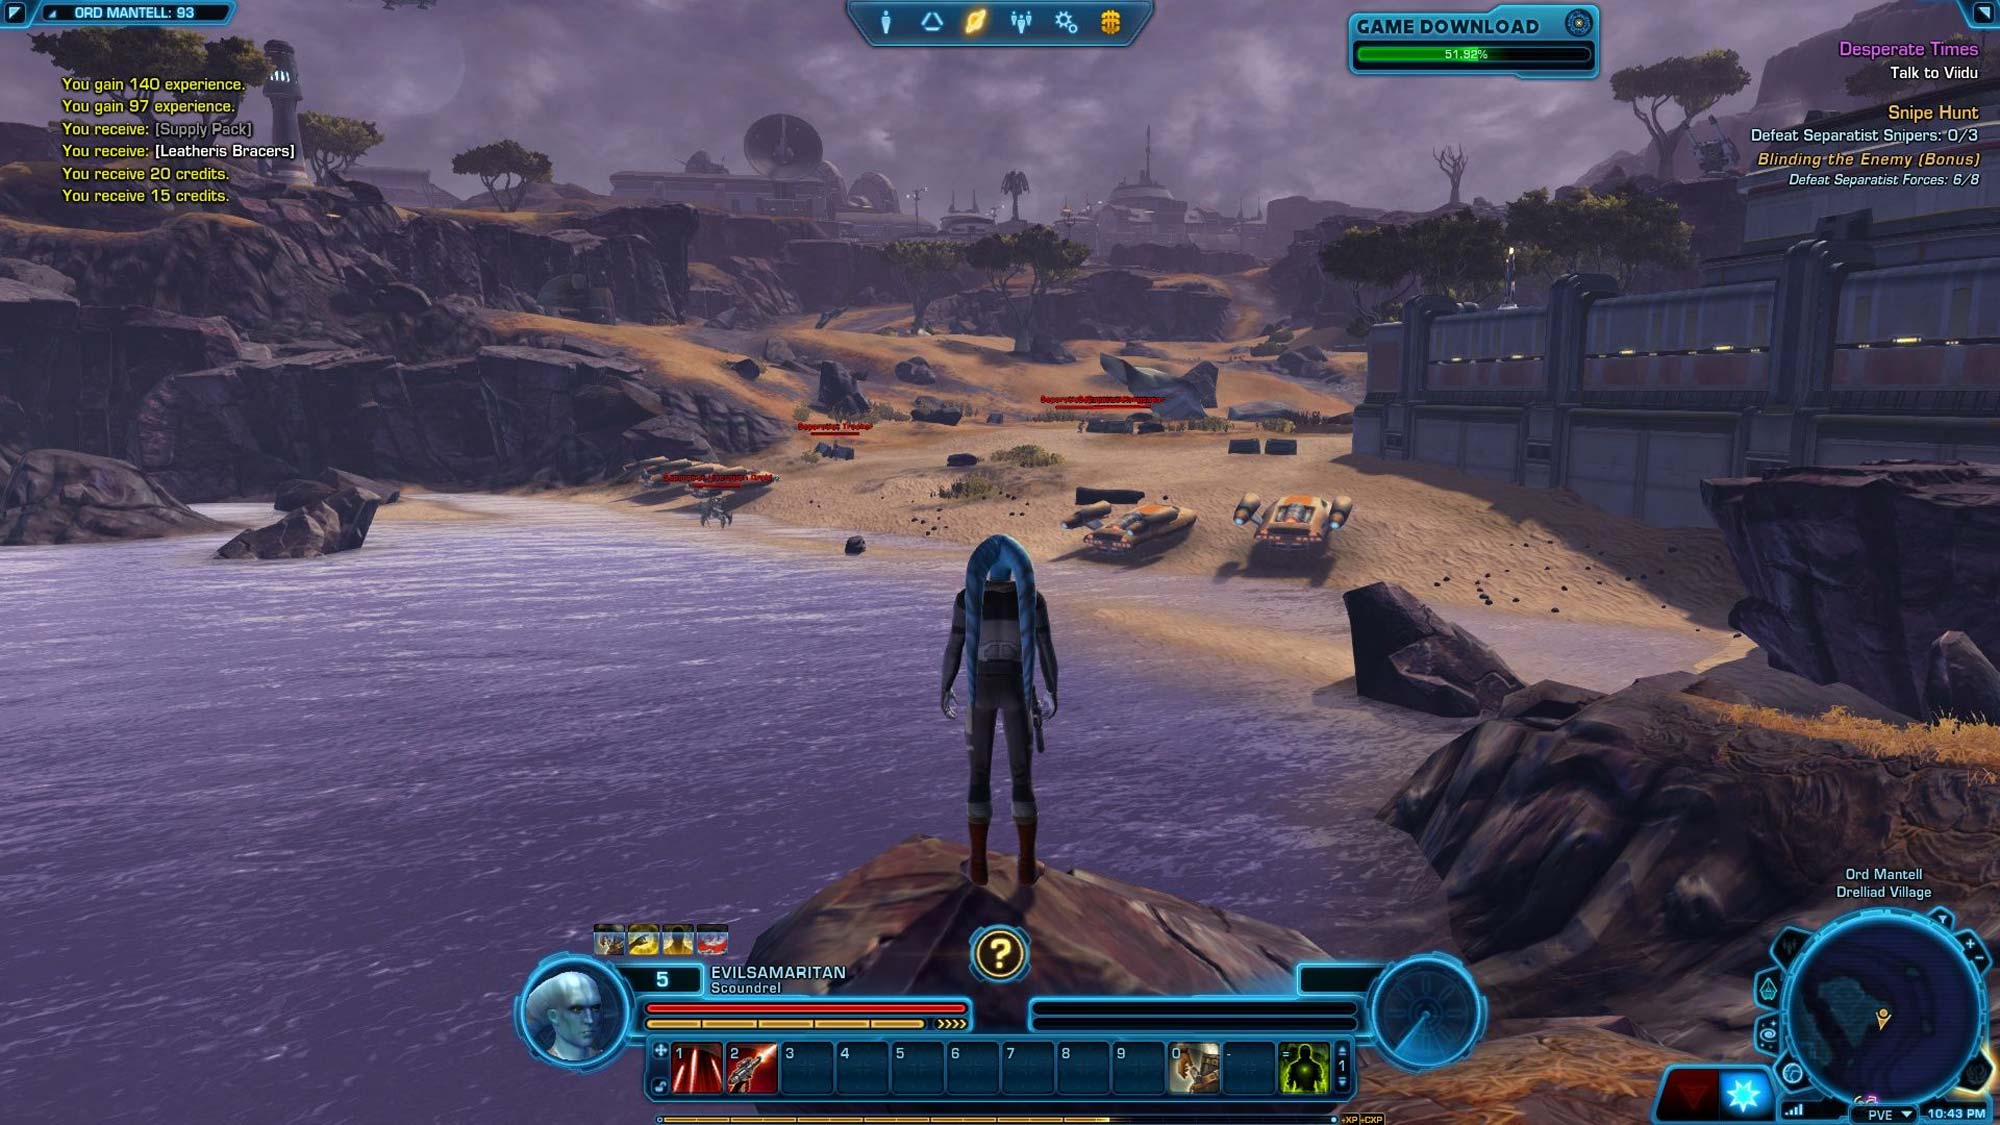 The best free PC games: Star Wars: The Old Republic